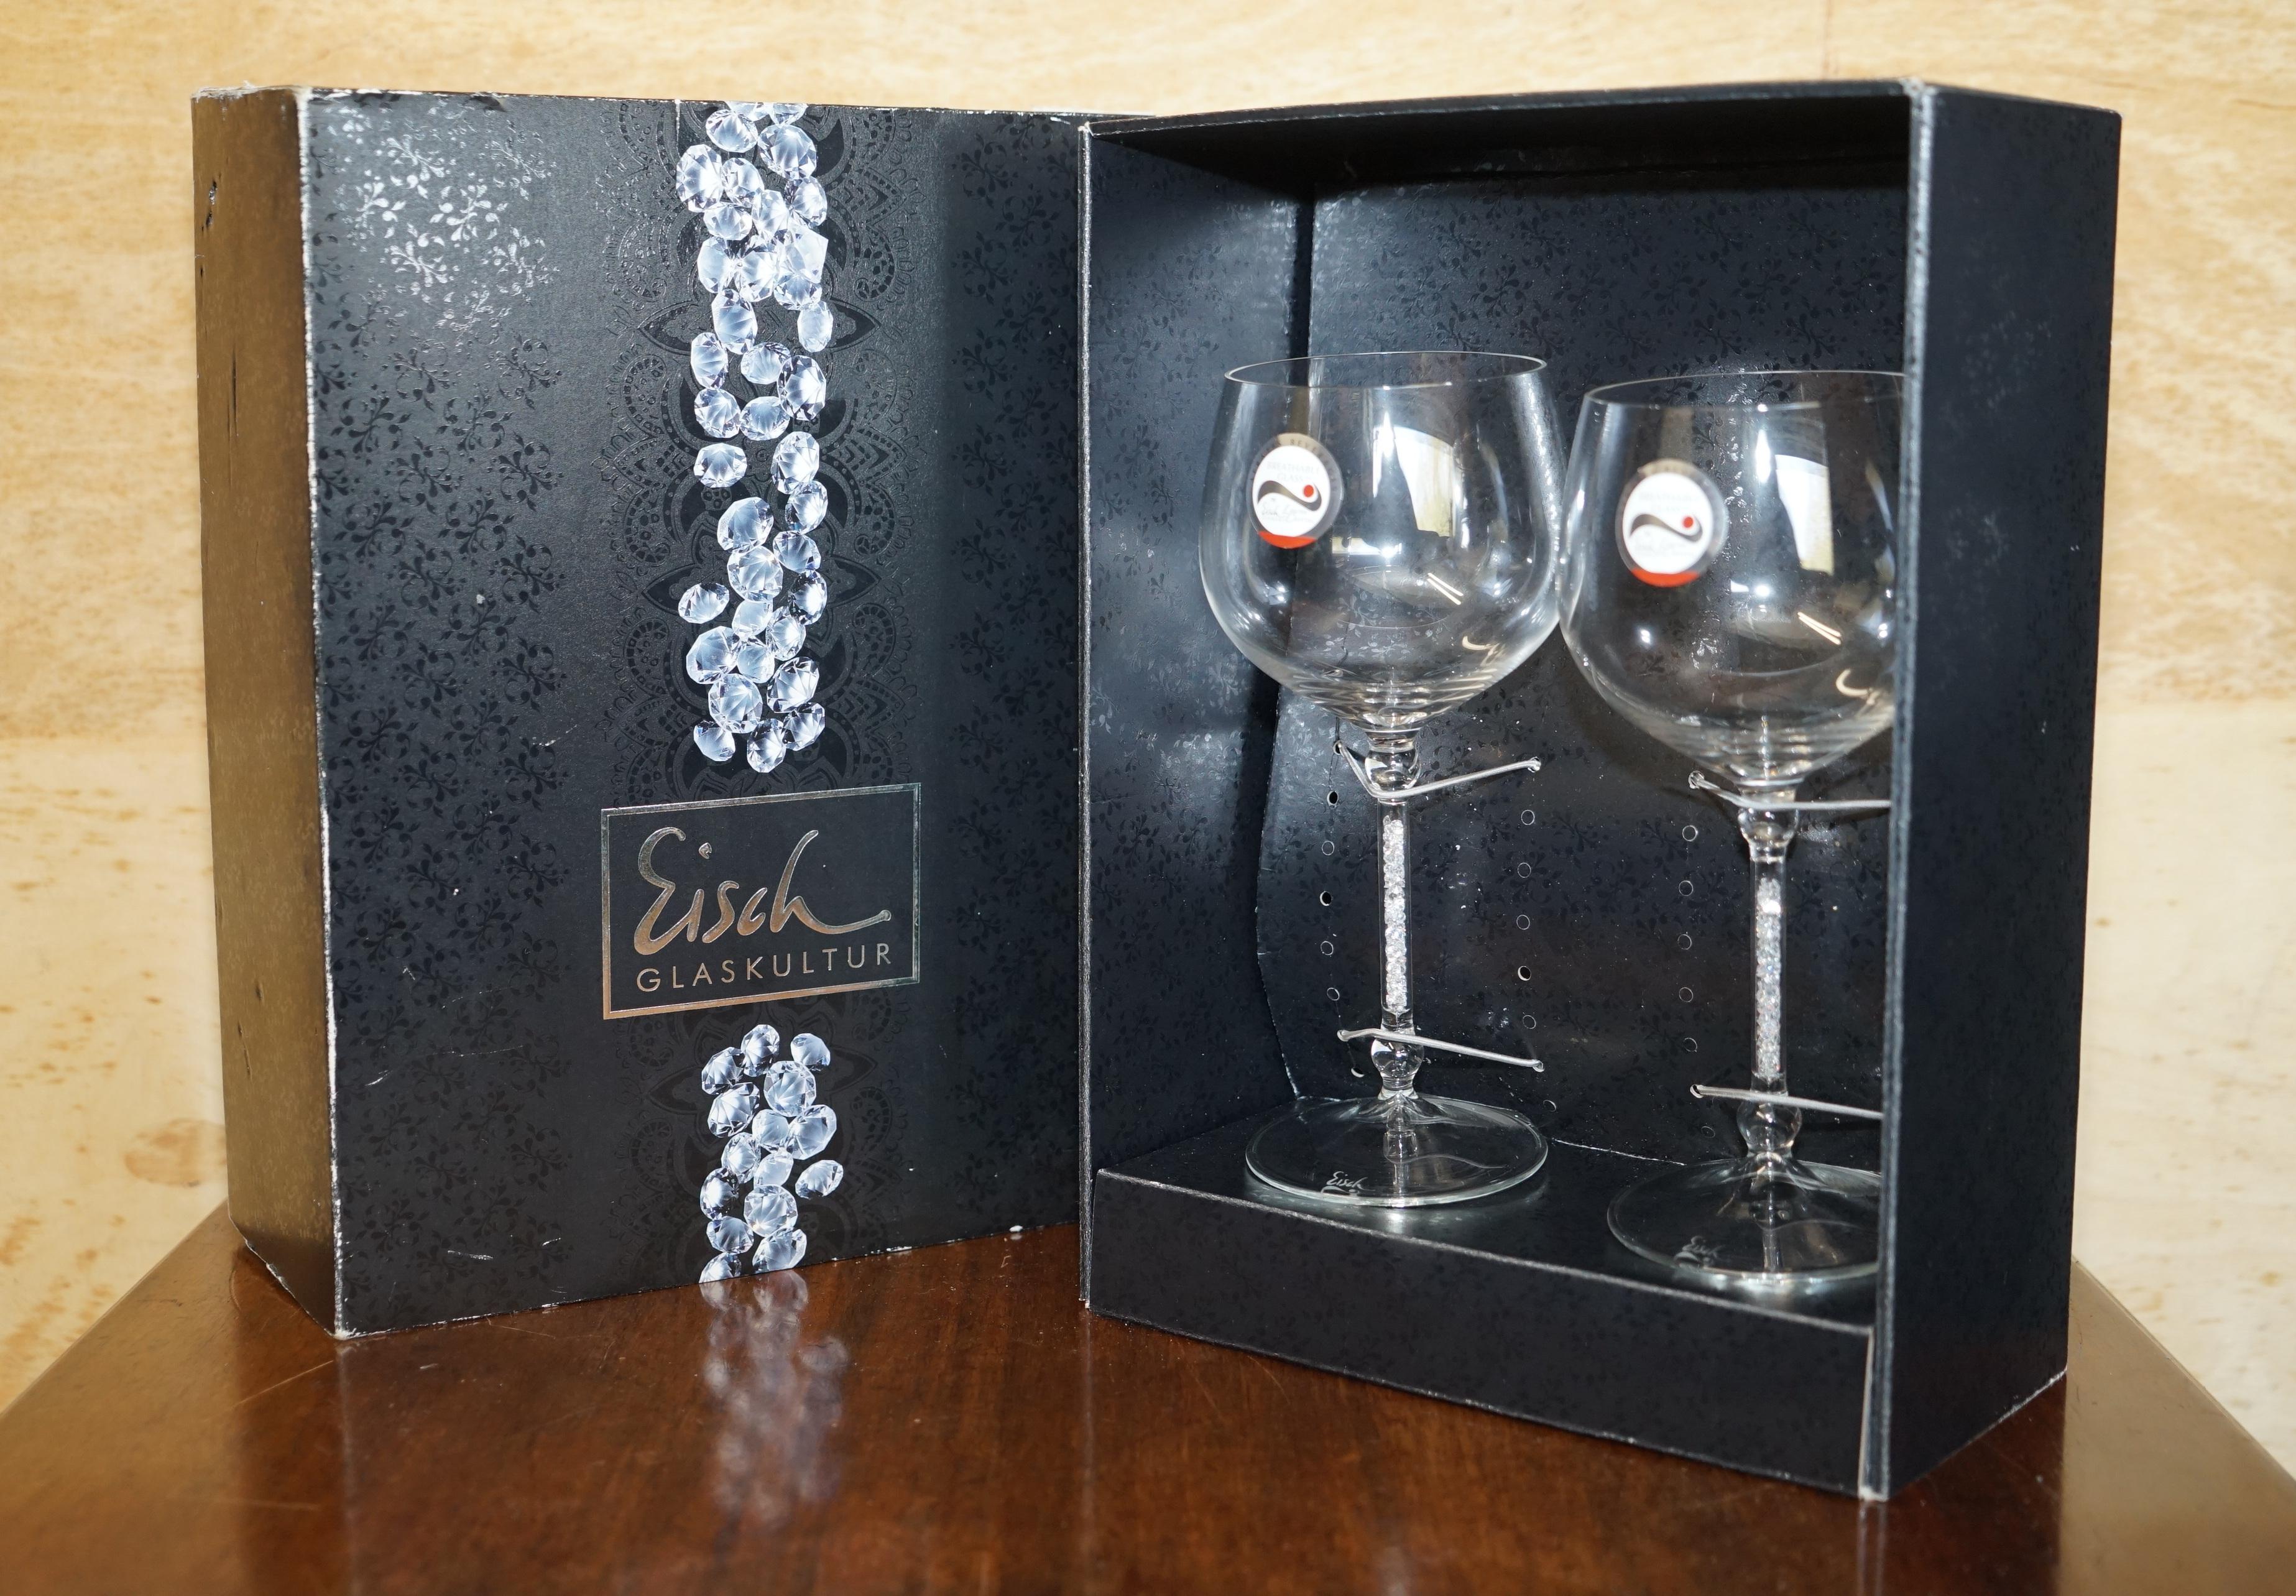 Royal House Antiques

Royal House Antiques is delighted to offer for sale this stunning pair of brand new in the box Eisch Gladkultur breathable glasses designed by Lauren with

A lovely pair of very decorative glasses, they are crystal, signed to